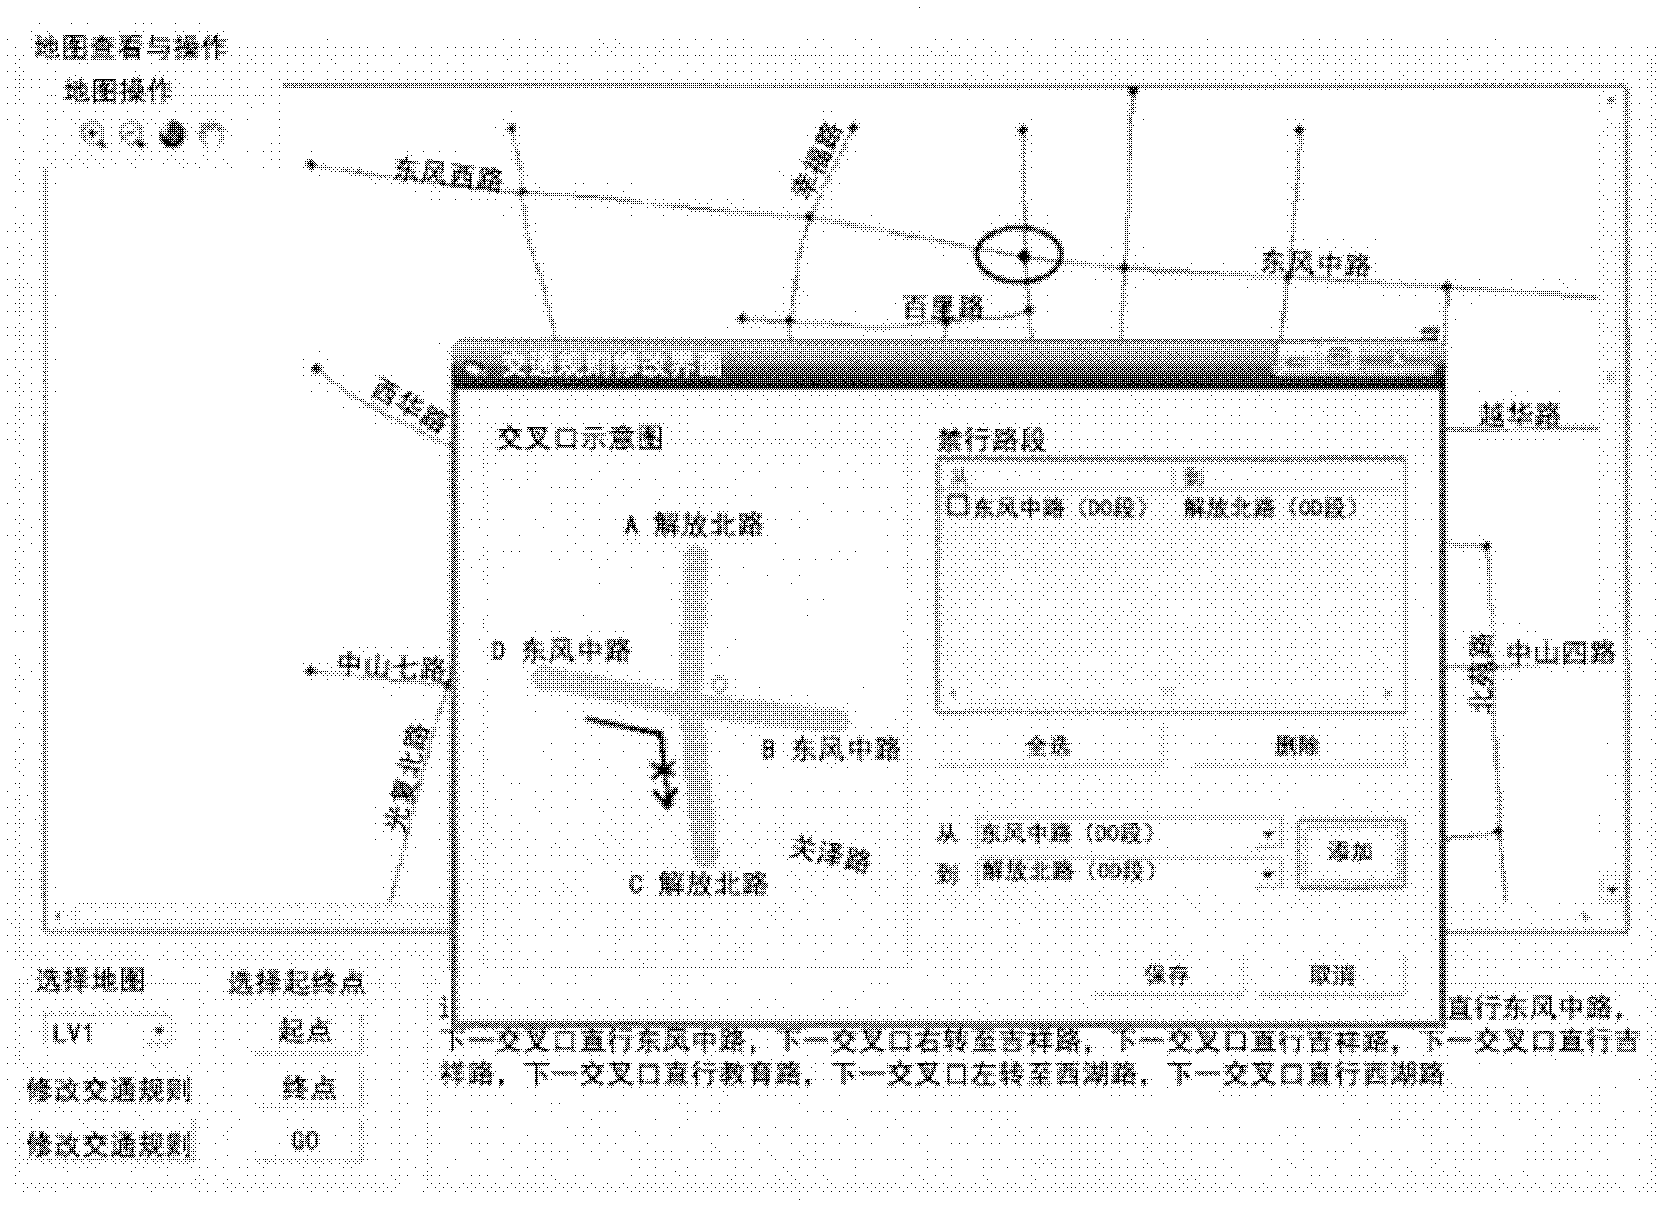 Dynamic routing optimization system and method based on real-time traffic information